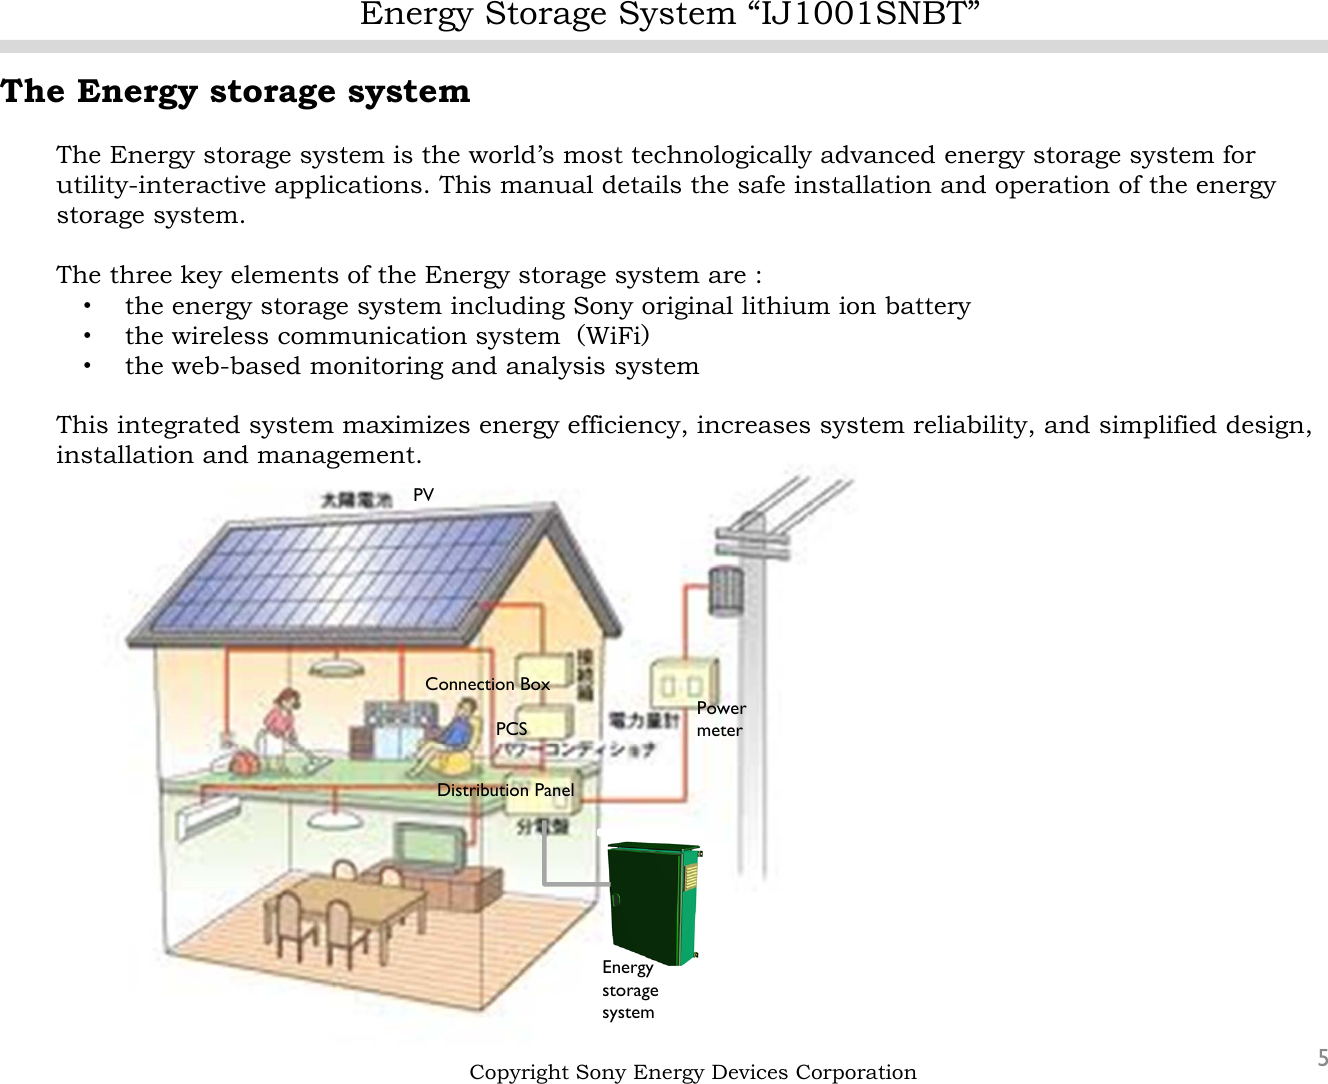 Energy Storage System “IJ1001SNBT”5The Energy storage systemThe Energy storage system is the world’s most technologically advanced energy storage system for utility-interactive applications. This manual details the safe installation and operation of the energy storage system.The three key elements of the Energy storage system are :・the energy storage system including Sony original lithium ion battery・the wireless communication system（WiFi）・the web-based monitoring and analysis systemThis integrated system maximizes energy efficiency, increases system reliability, and simplified design,installation and management.Copyright Sony Energy Devices CorporationPCSDistribution PanelConnection BoxPowermeterPVEnergy storage system